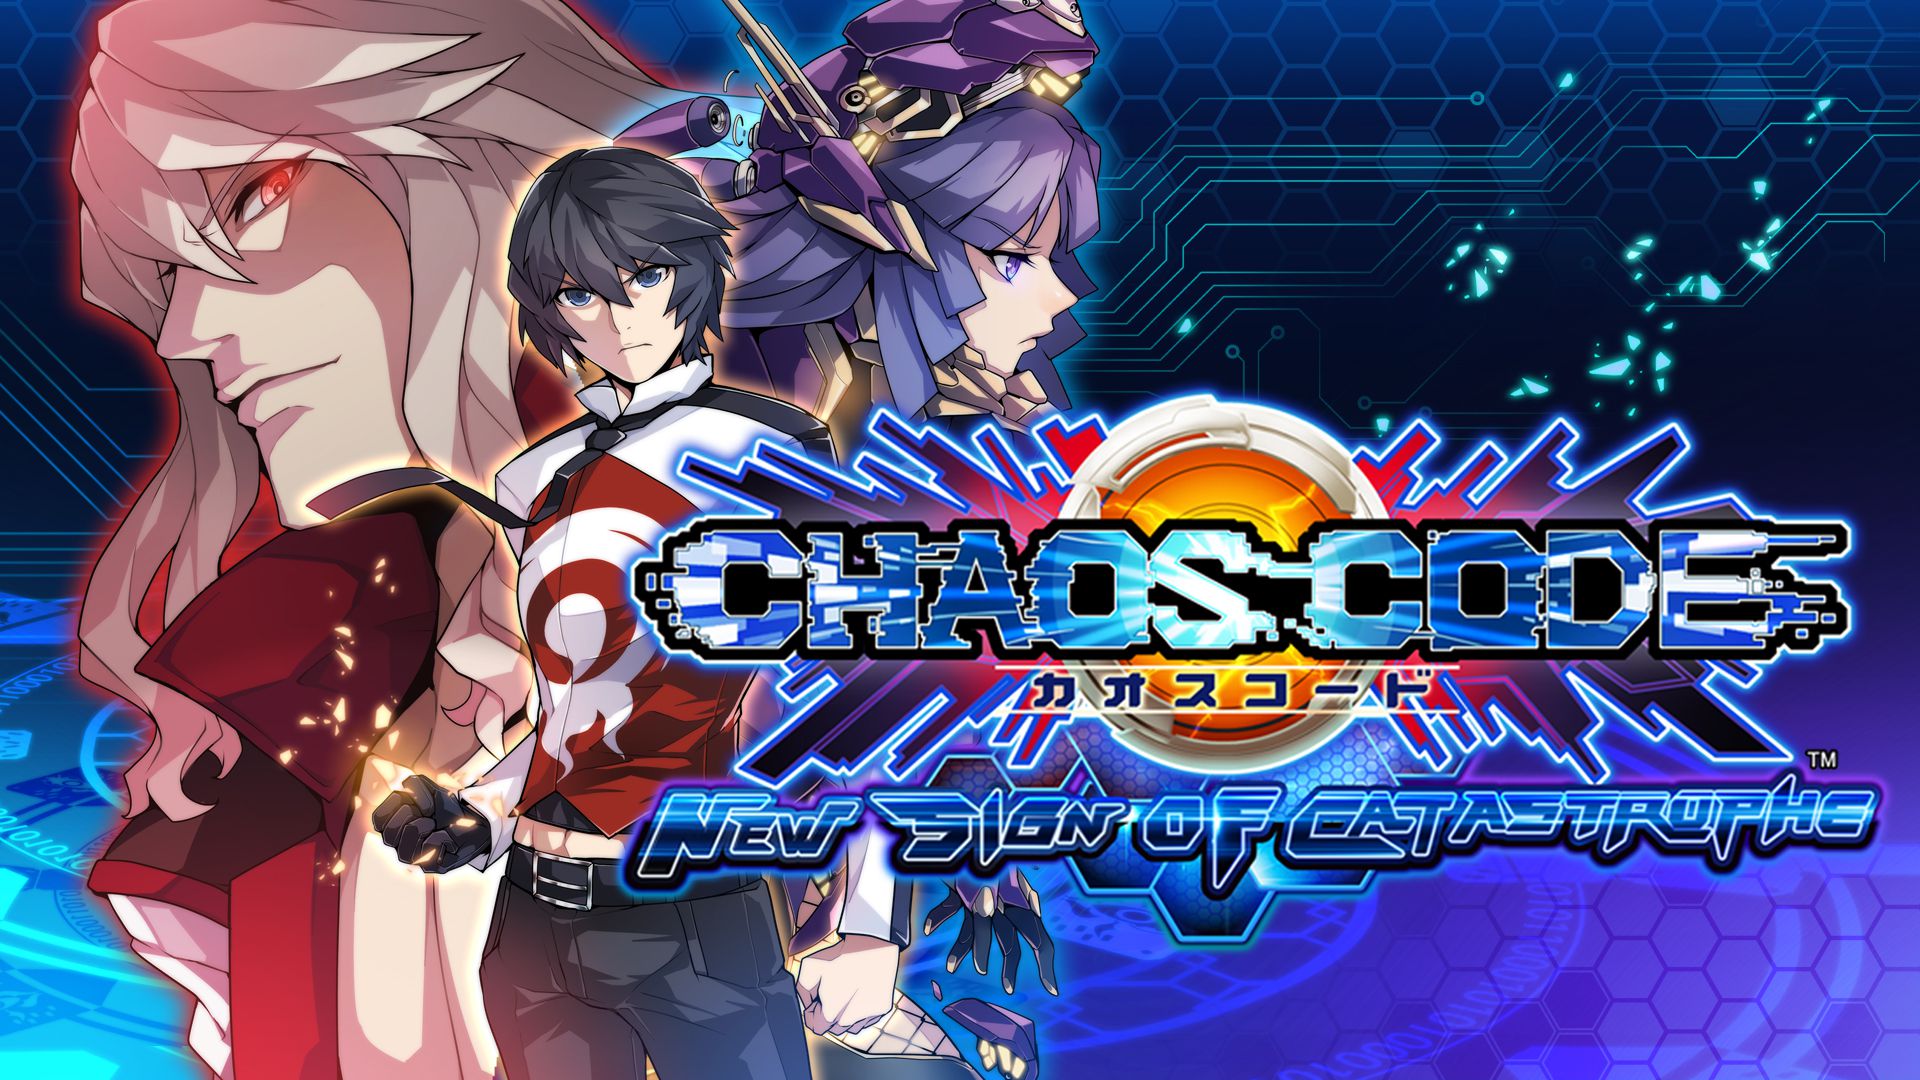 Chaos Code New Sign of Catastrophe Principal